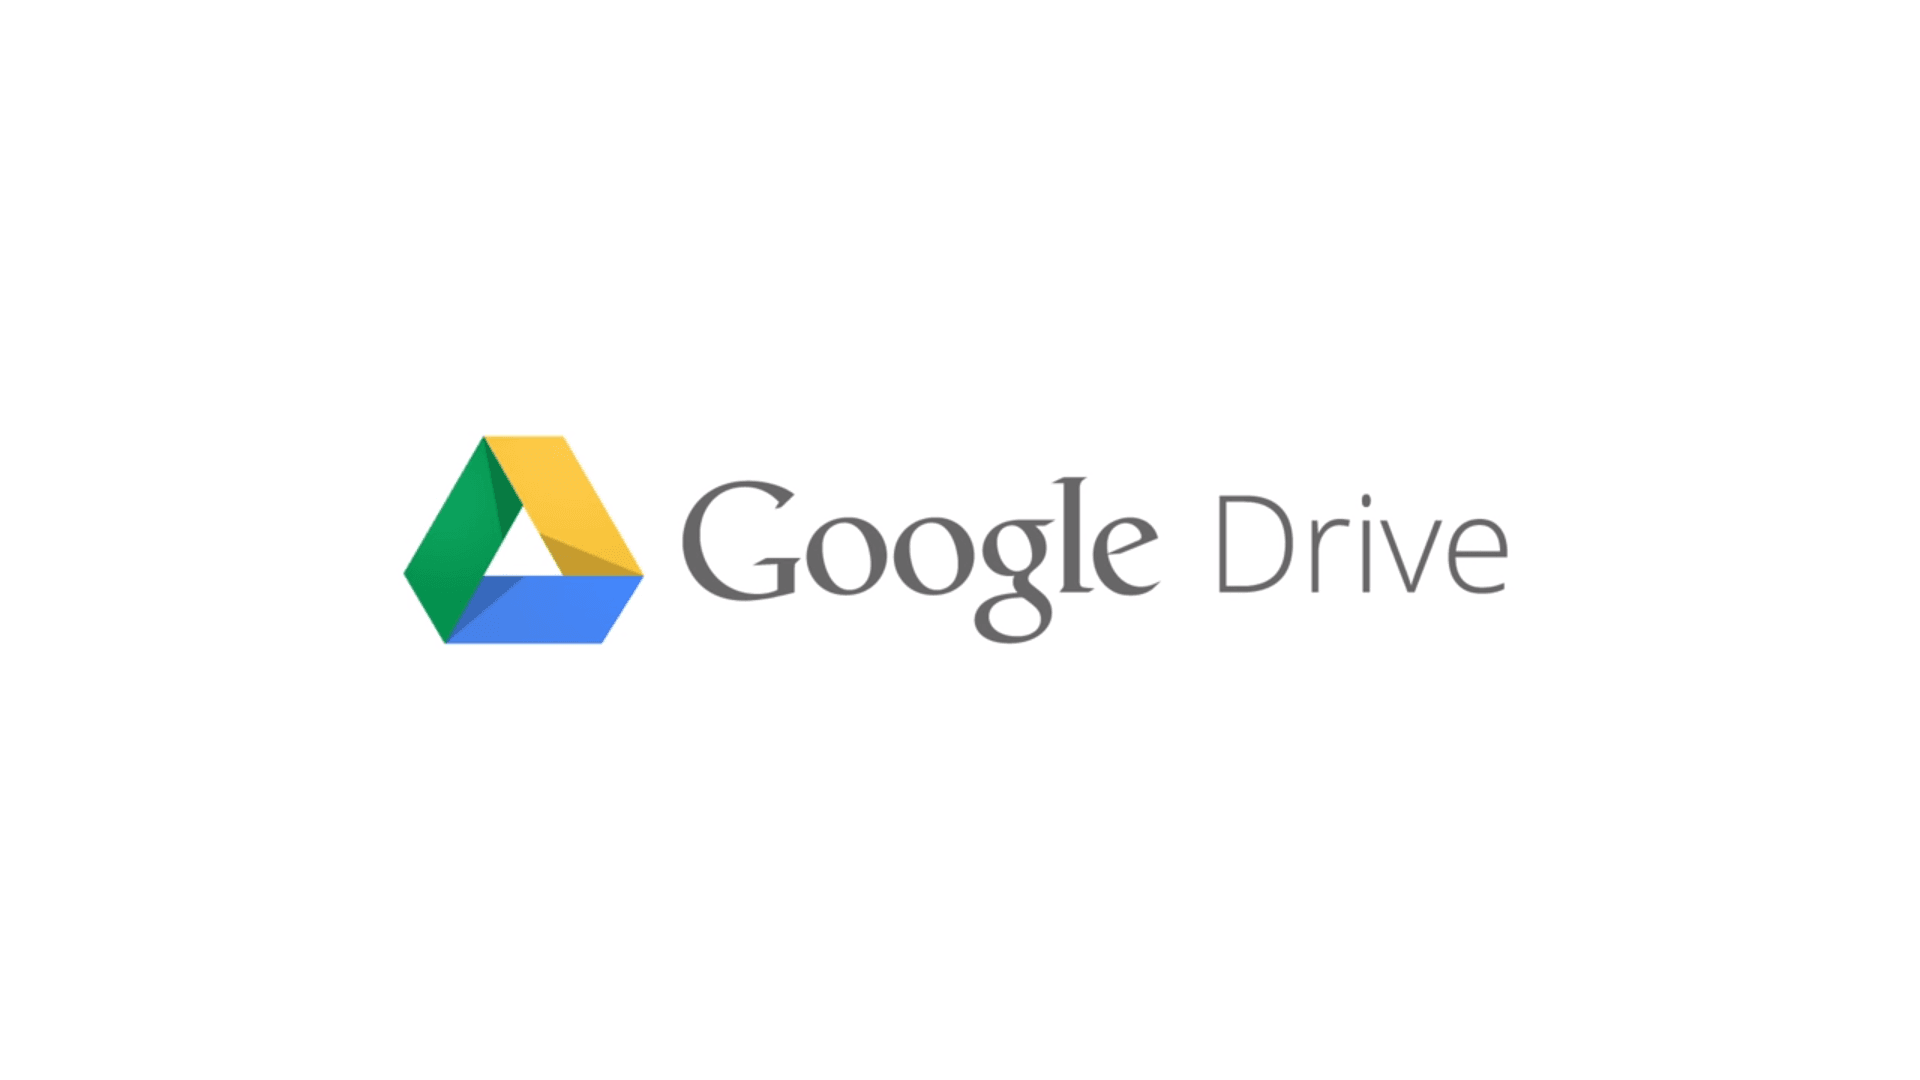 Google Drive vs OneDrive: Which is better?